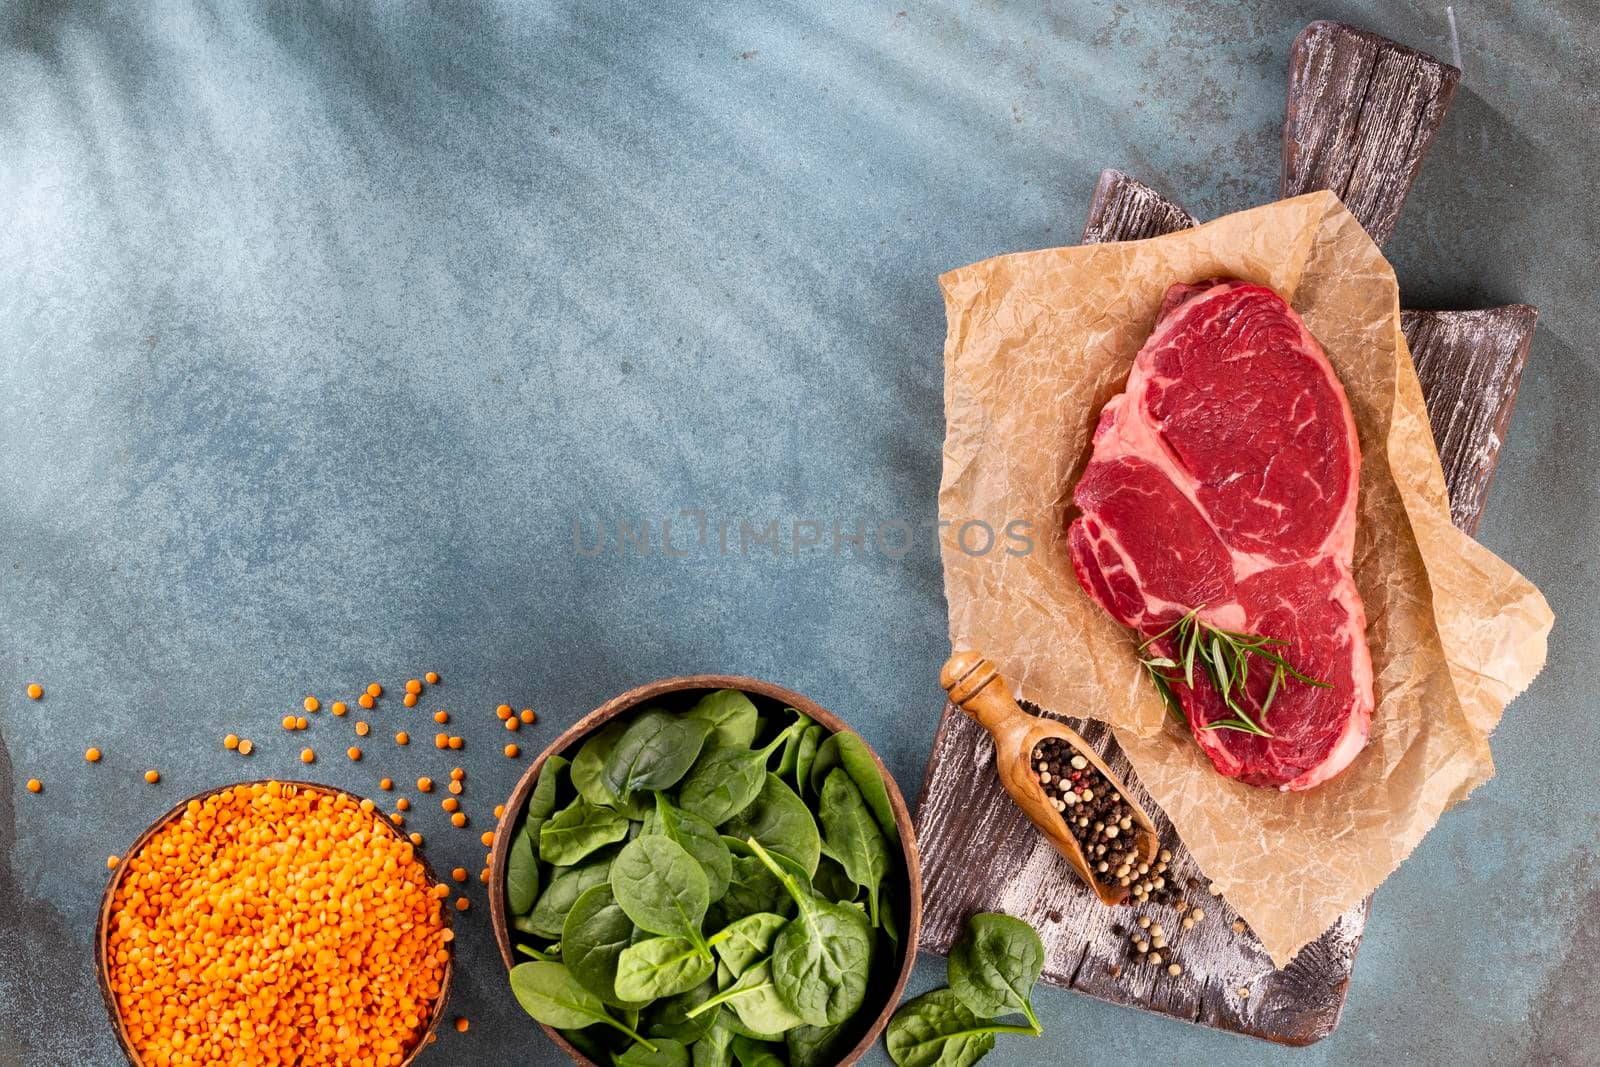 Fresh raw rib-eye steak on wooden cutting board, with spinach, lentils and rosmary in a rustic style.